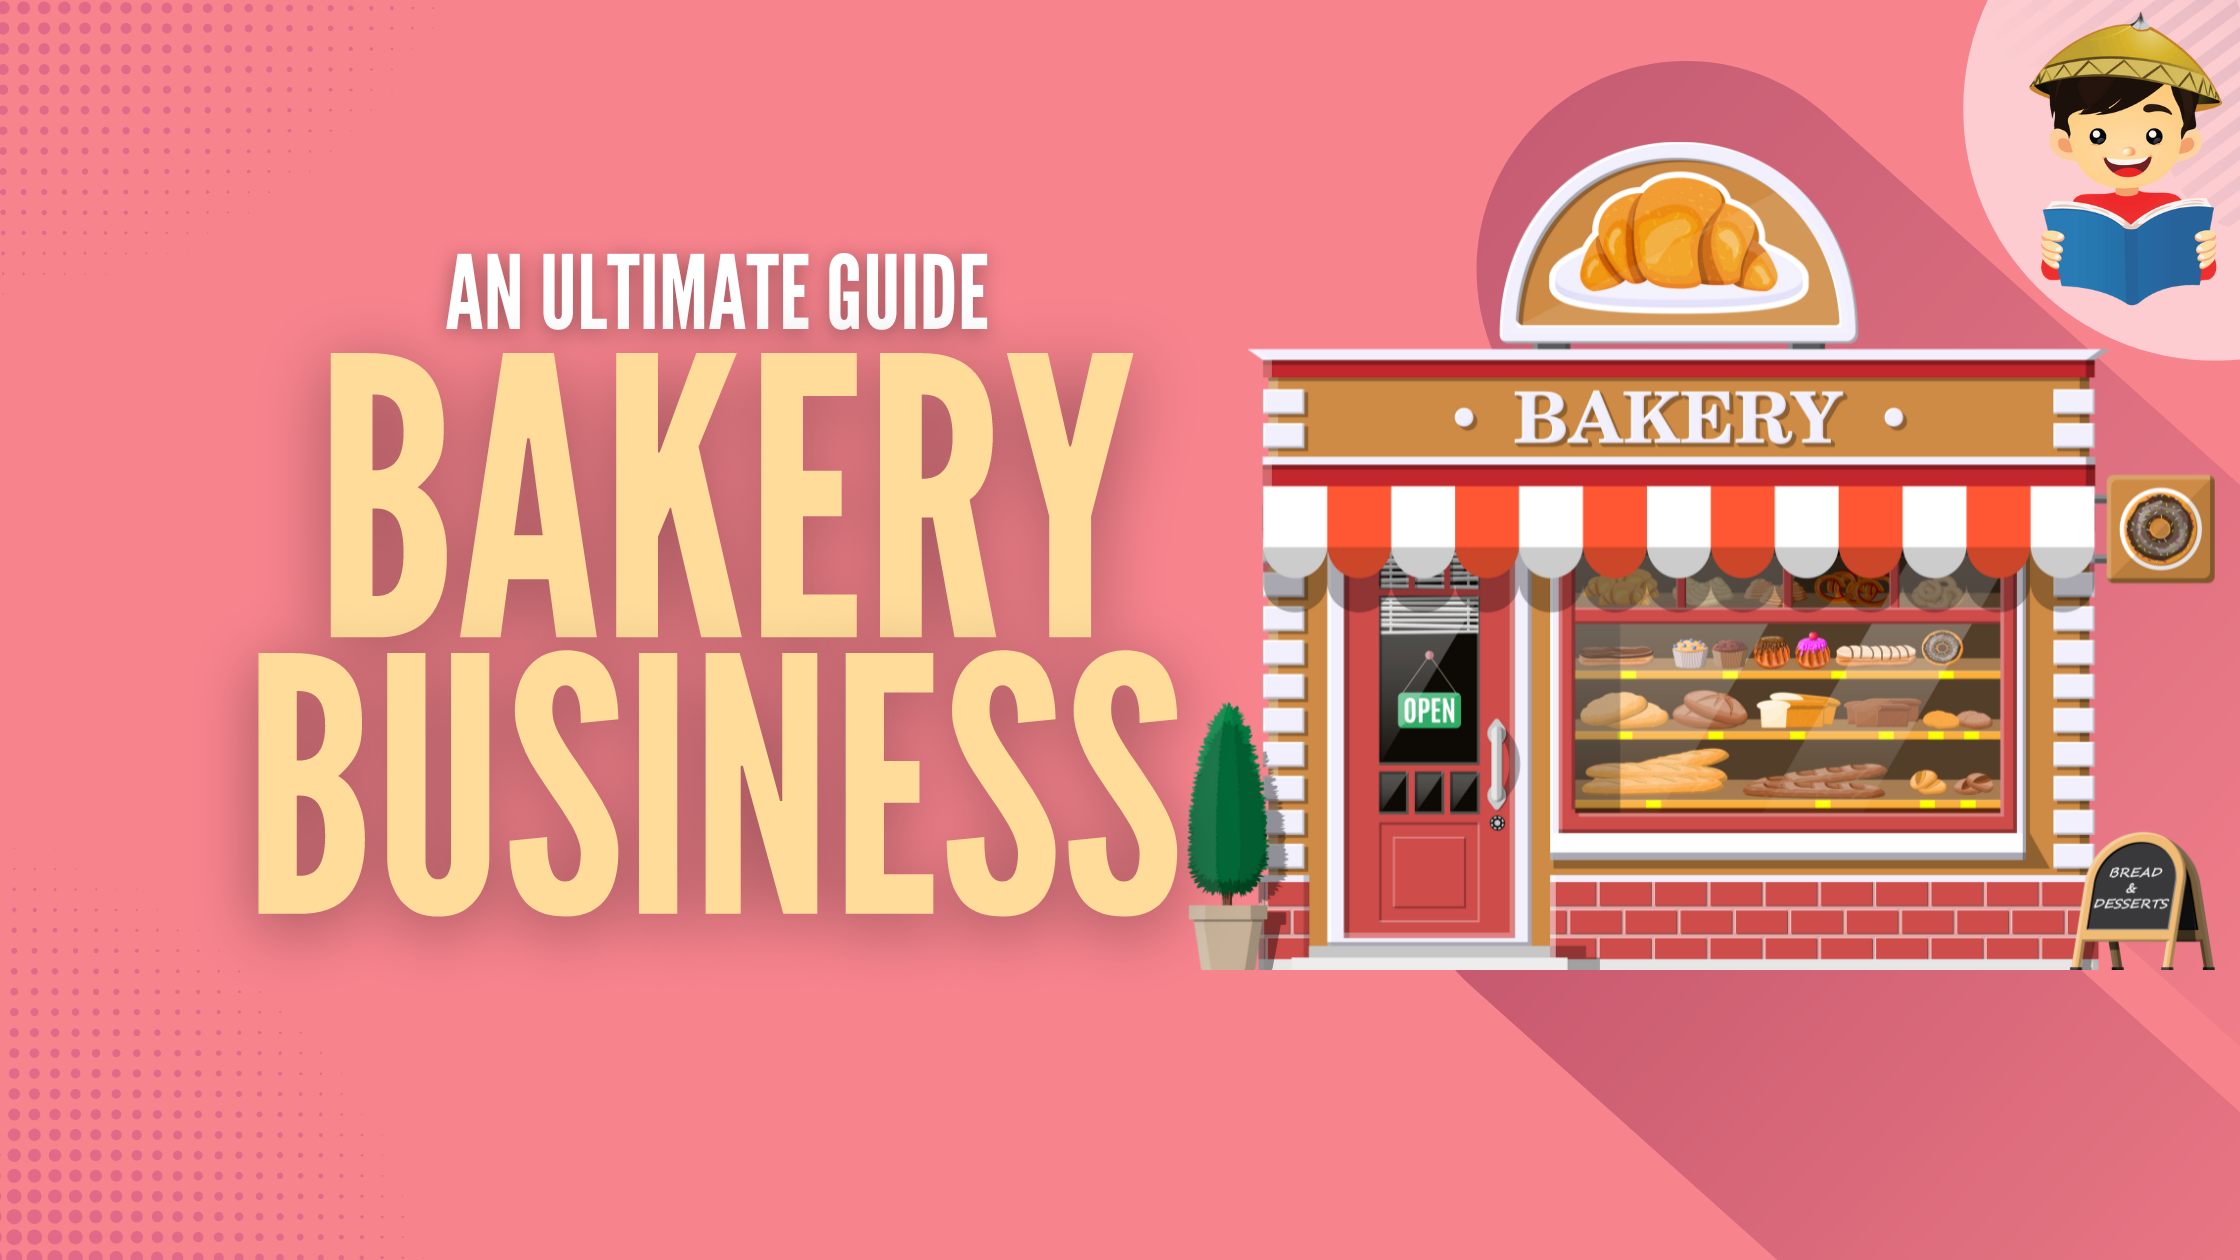 bakery business in the philippines featured image